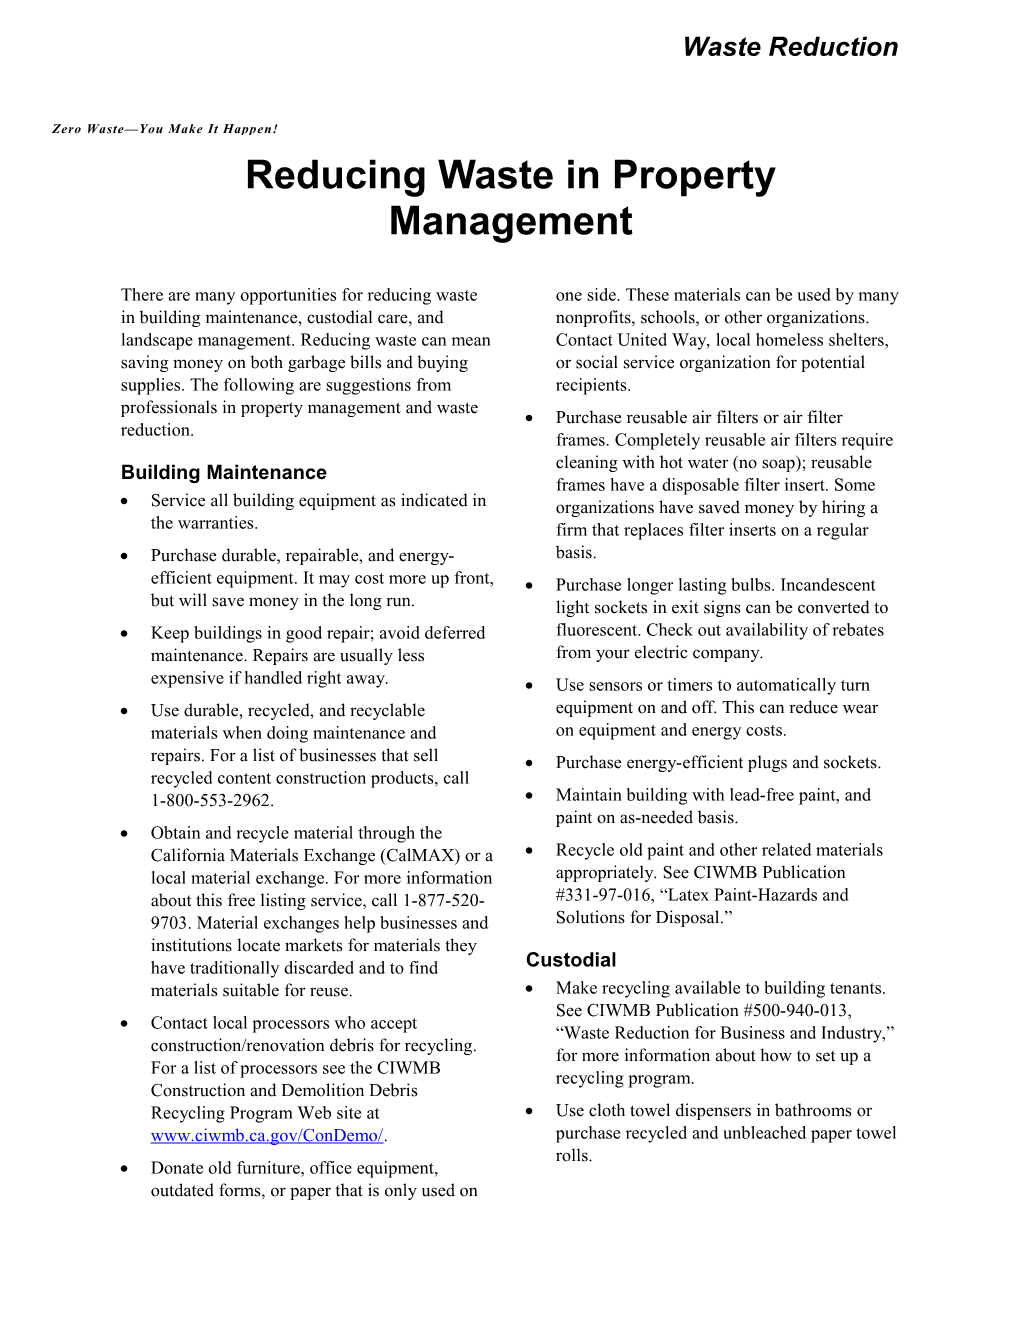 Reducing Waste in Property Management